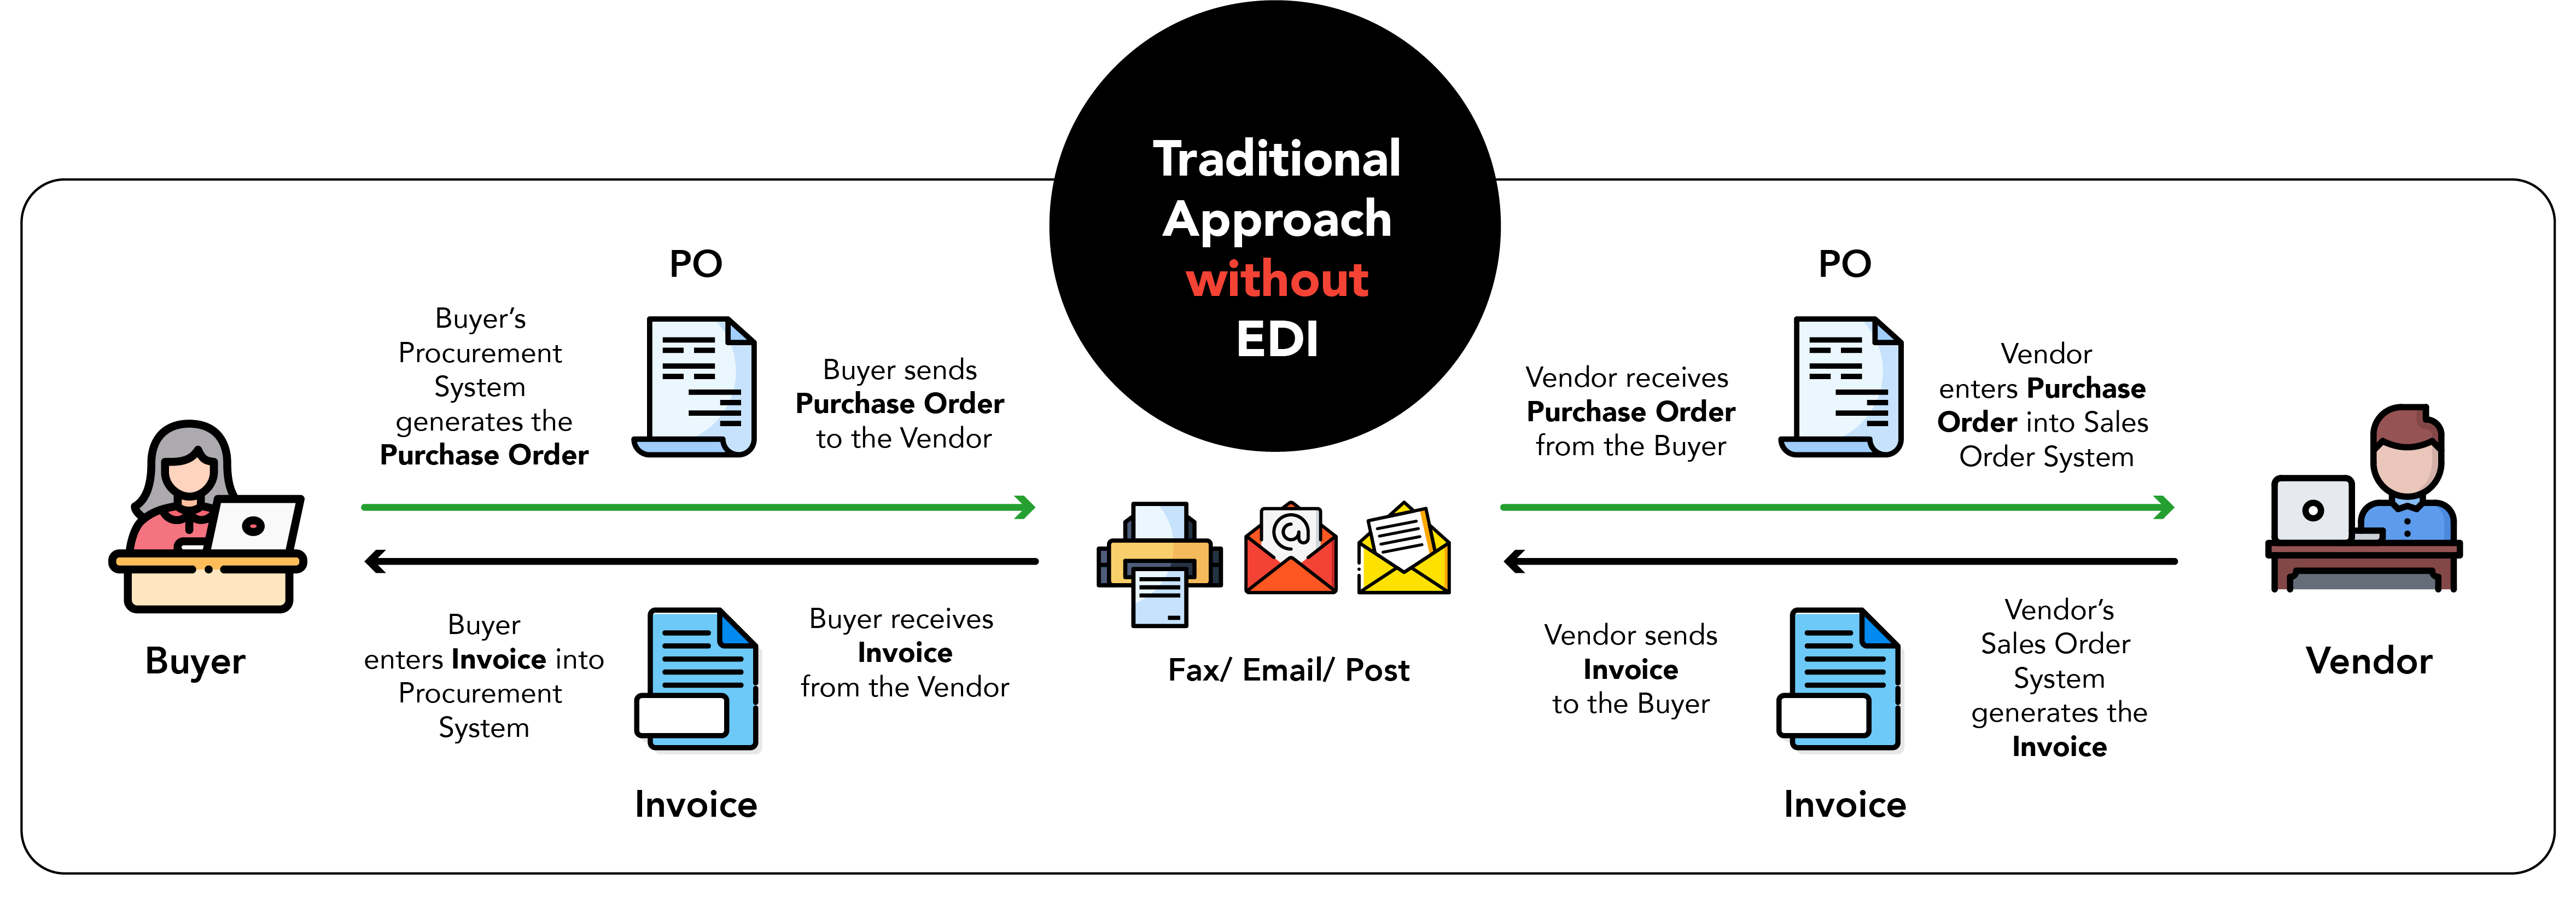 Traditional Approach without EDI